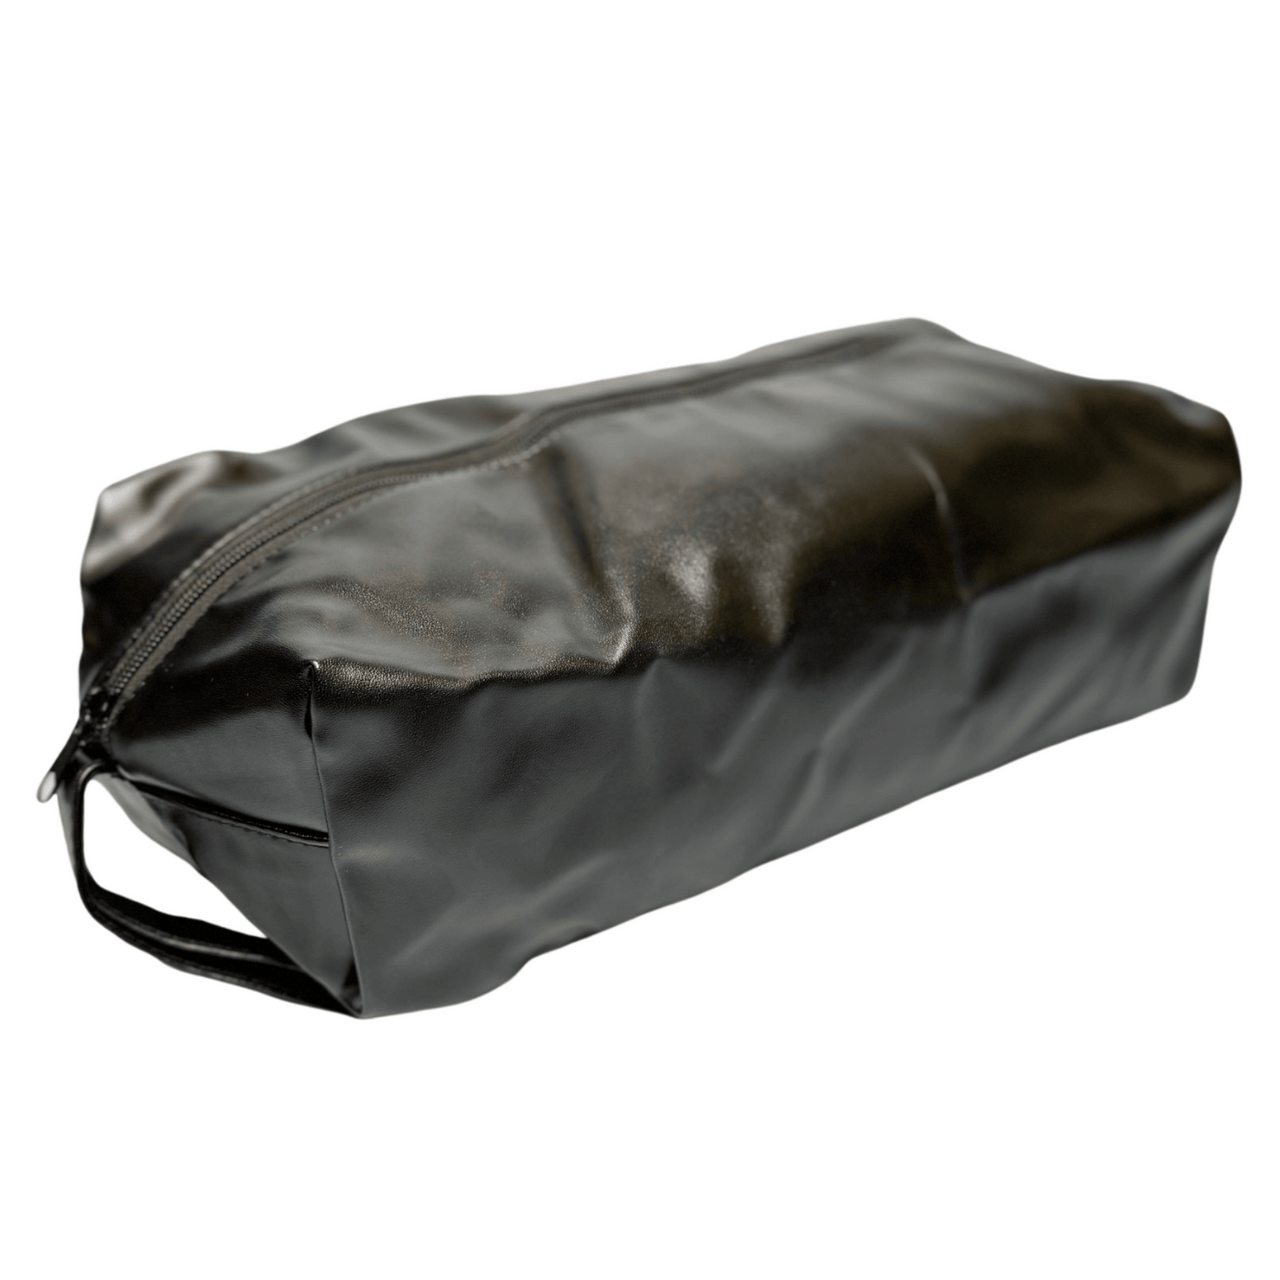 Chic Black PU Leather Toy Storage Bag – 13-Inch Discreet Organizer with Secure Zipper for Sensory Play Accessories